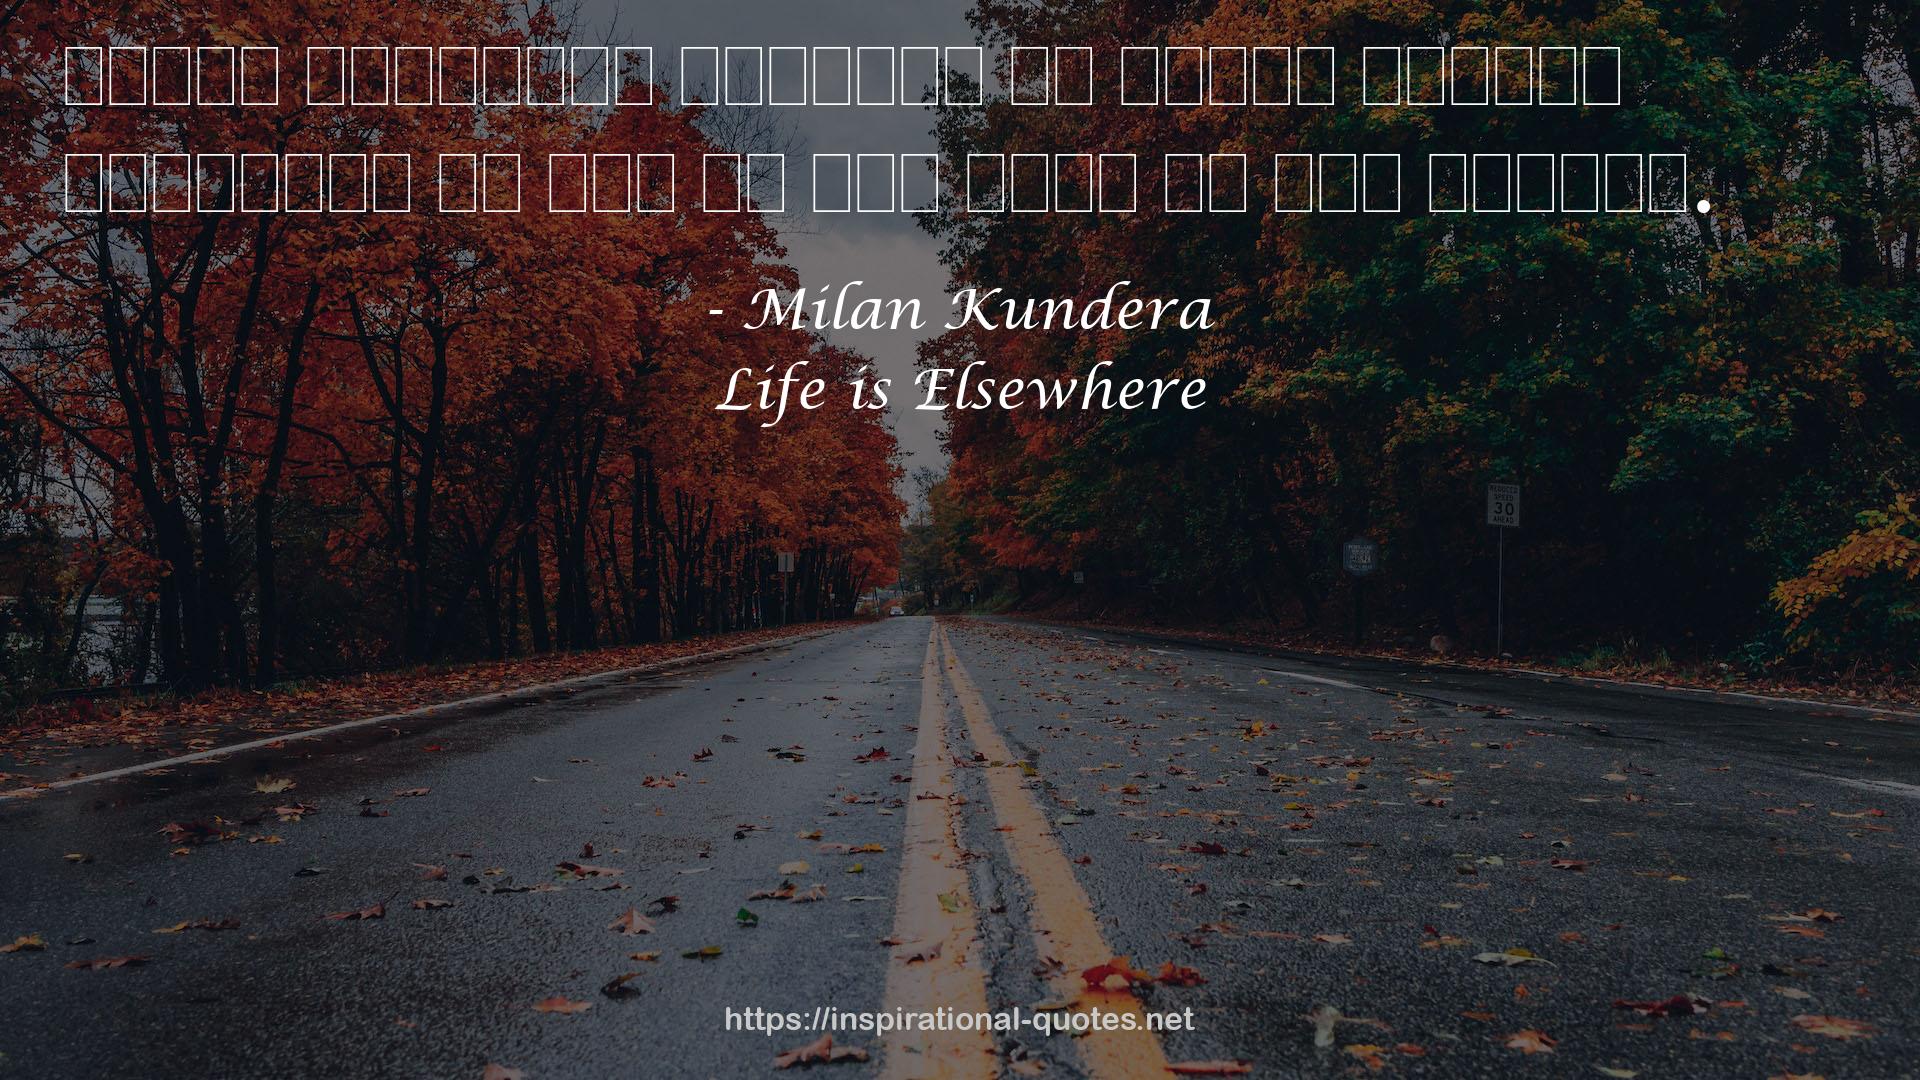 Life is Elsewhere QUOTES